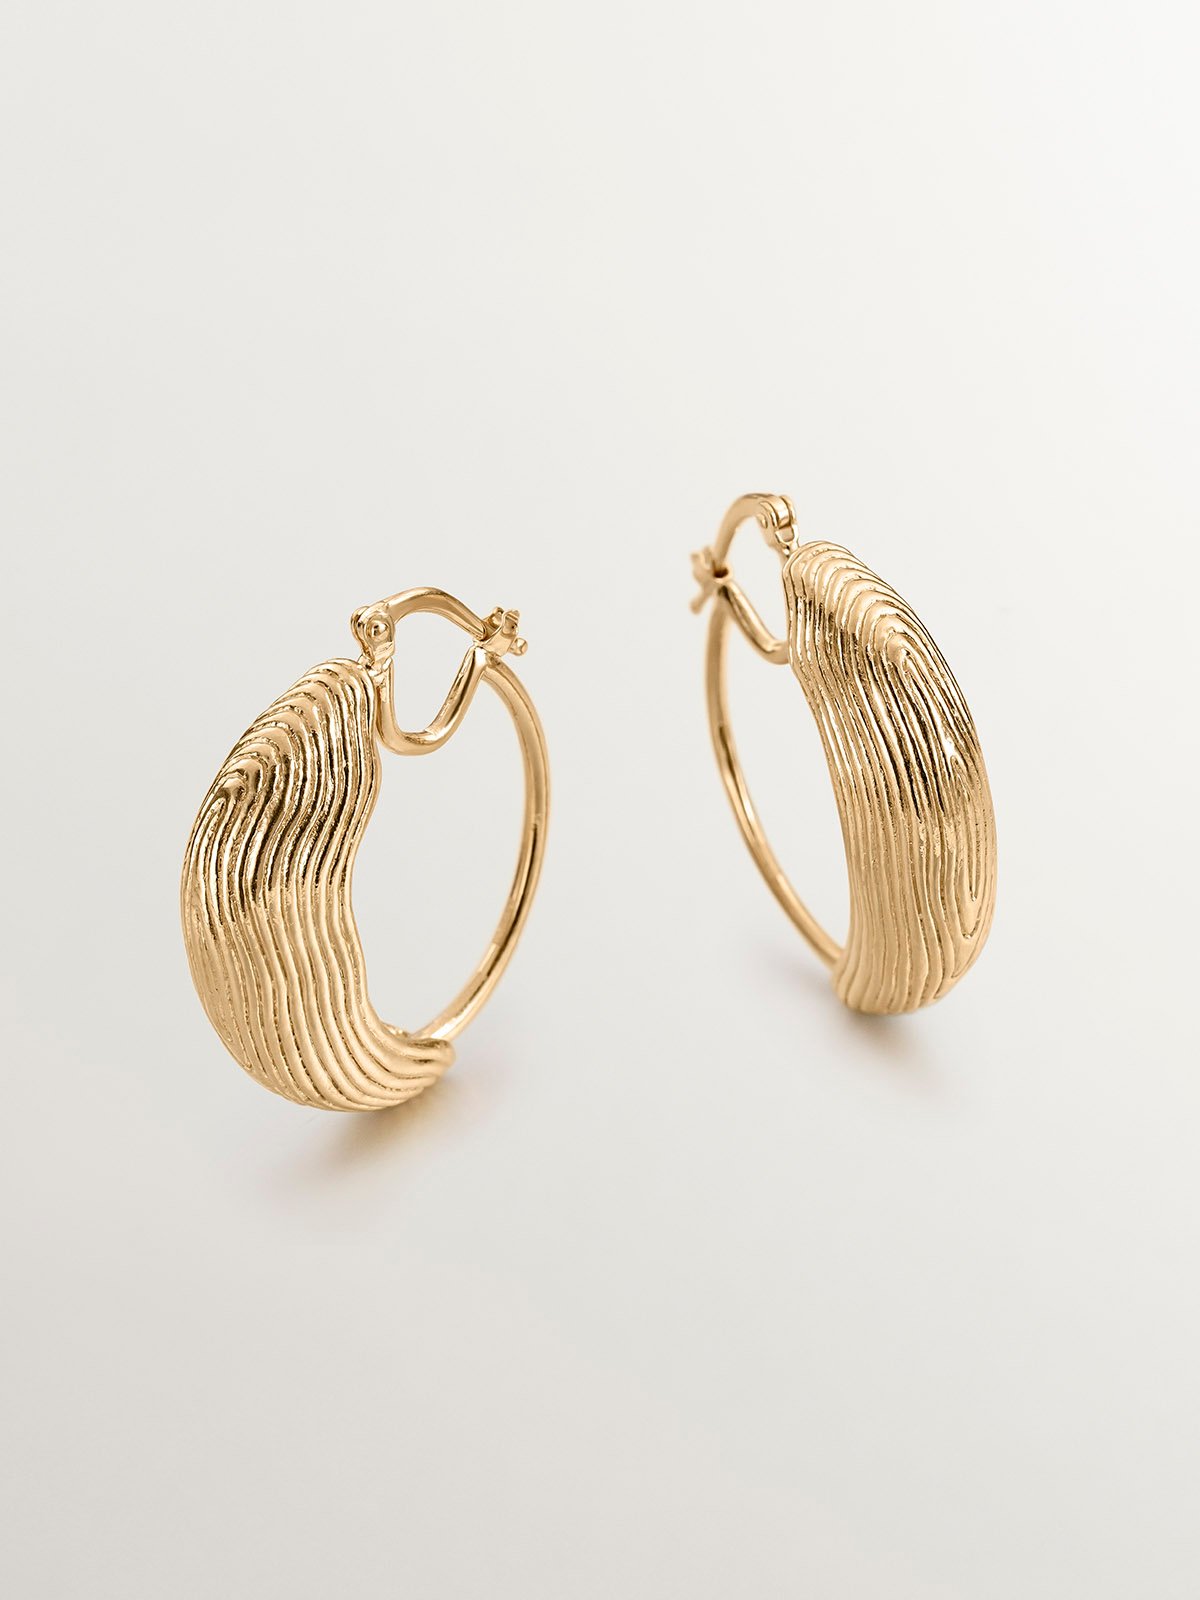 Medium hoop earrings made of 925 silver coated in 18K yellow gold with relief and irregular shape.